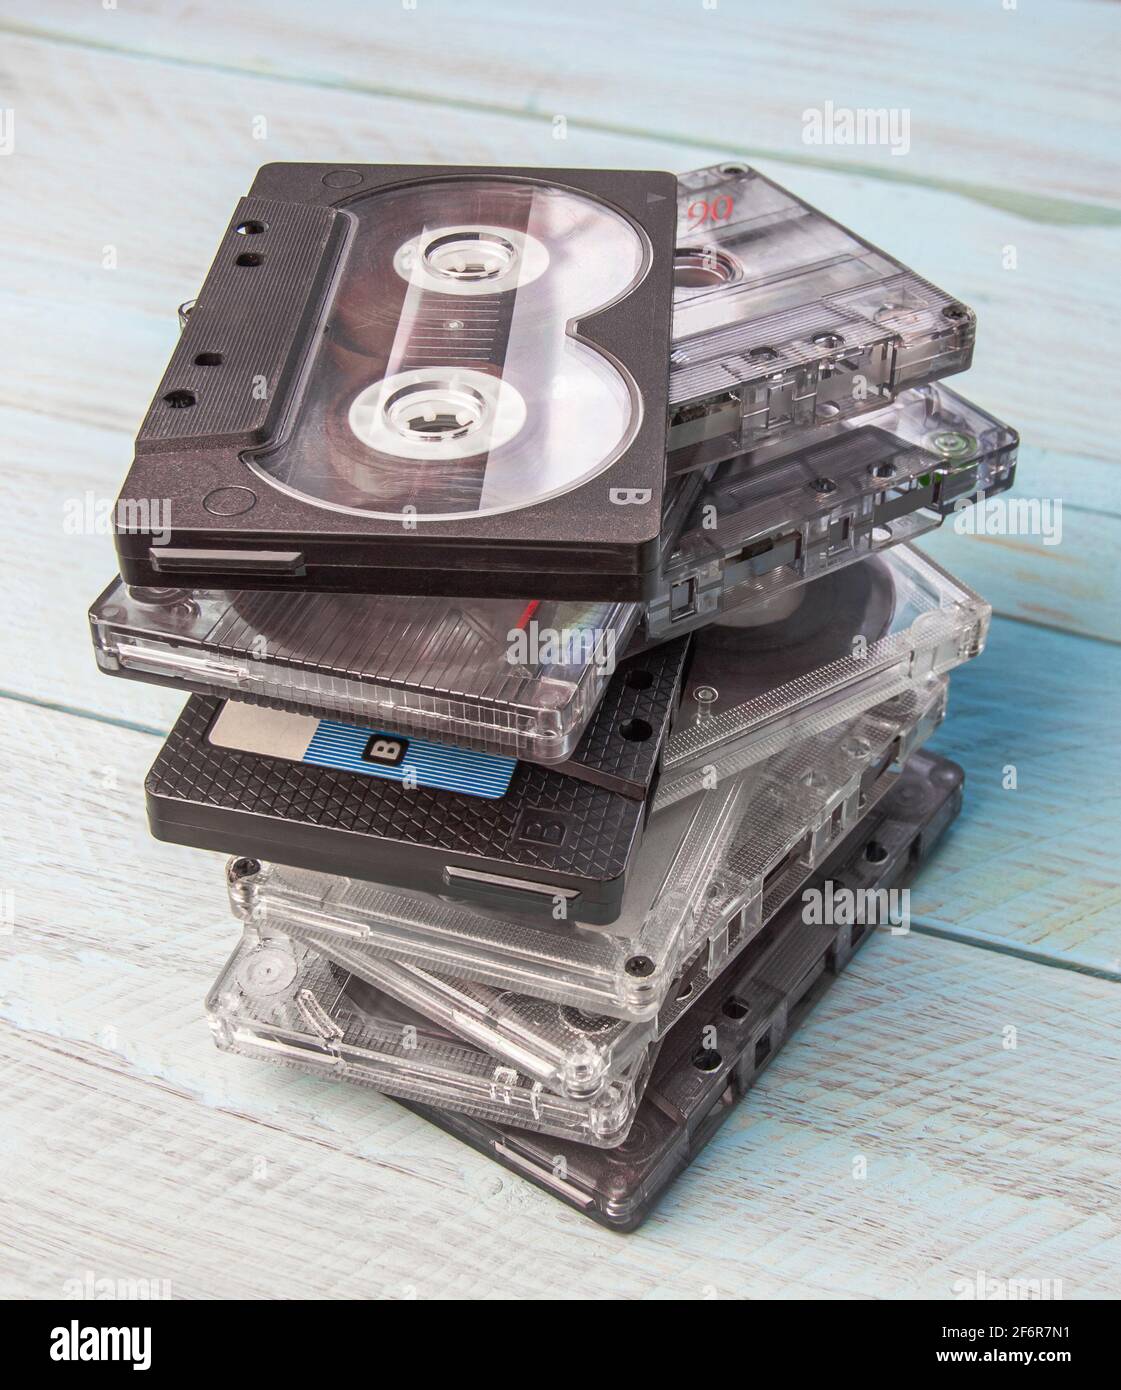 A careless stack of audio cassettes stands against a blue wooden background. Top view from the side. Vertical orientation.Close-up Stock Photo